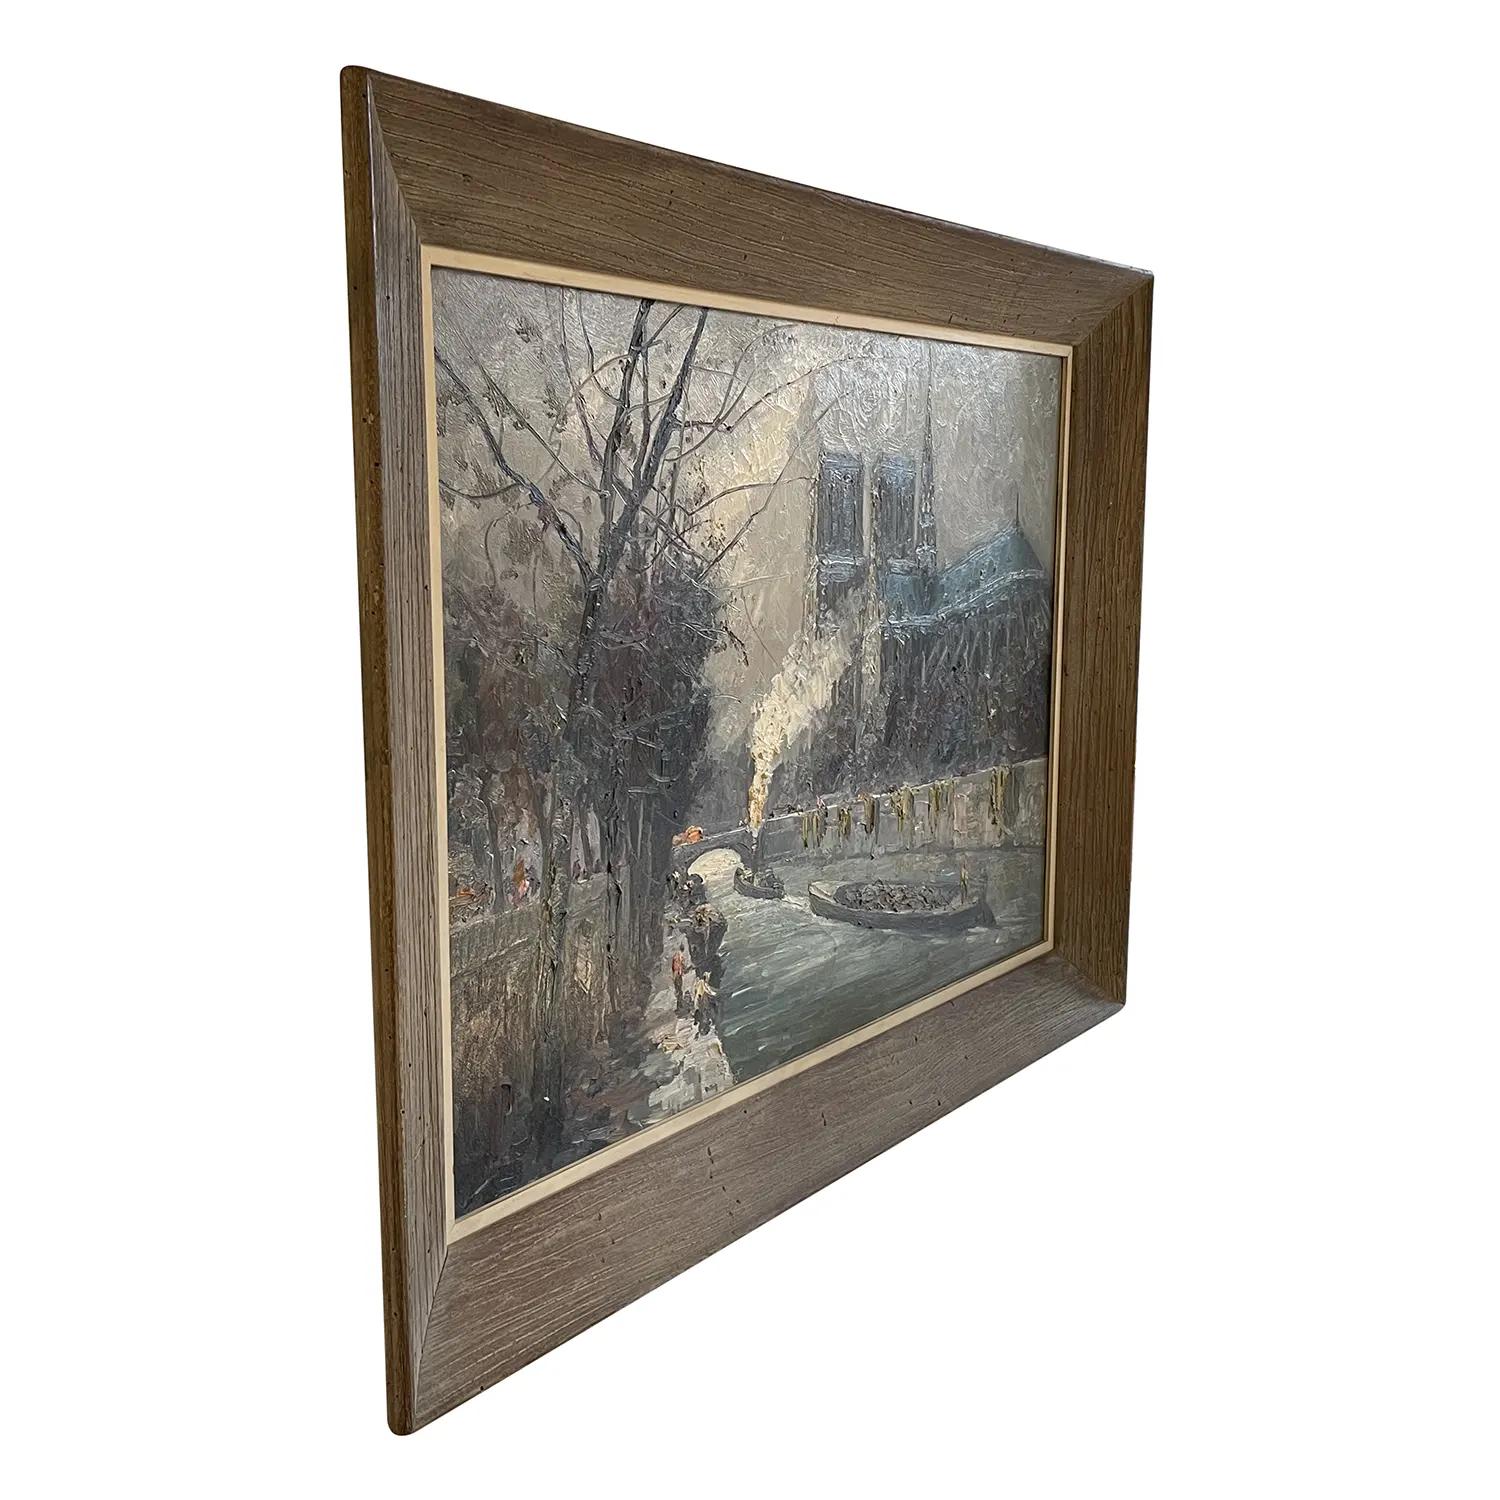 A blue-grey, white vintage Russian, French oil on canvas painting, portraying a cloudy day of the Notre Dame Cathedral from across the Seine river in Paris, painted by Vladimir Volodia Lazarev in a wooden frame, in good condition. The painting